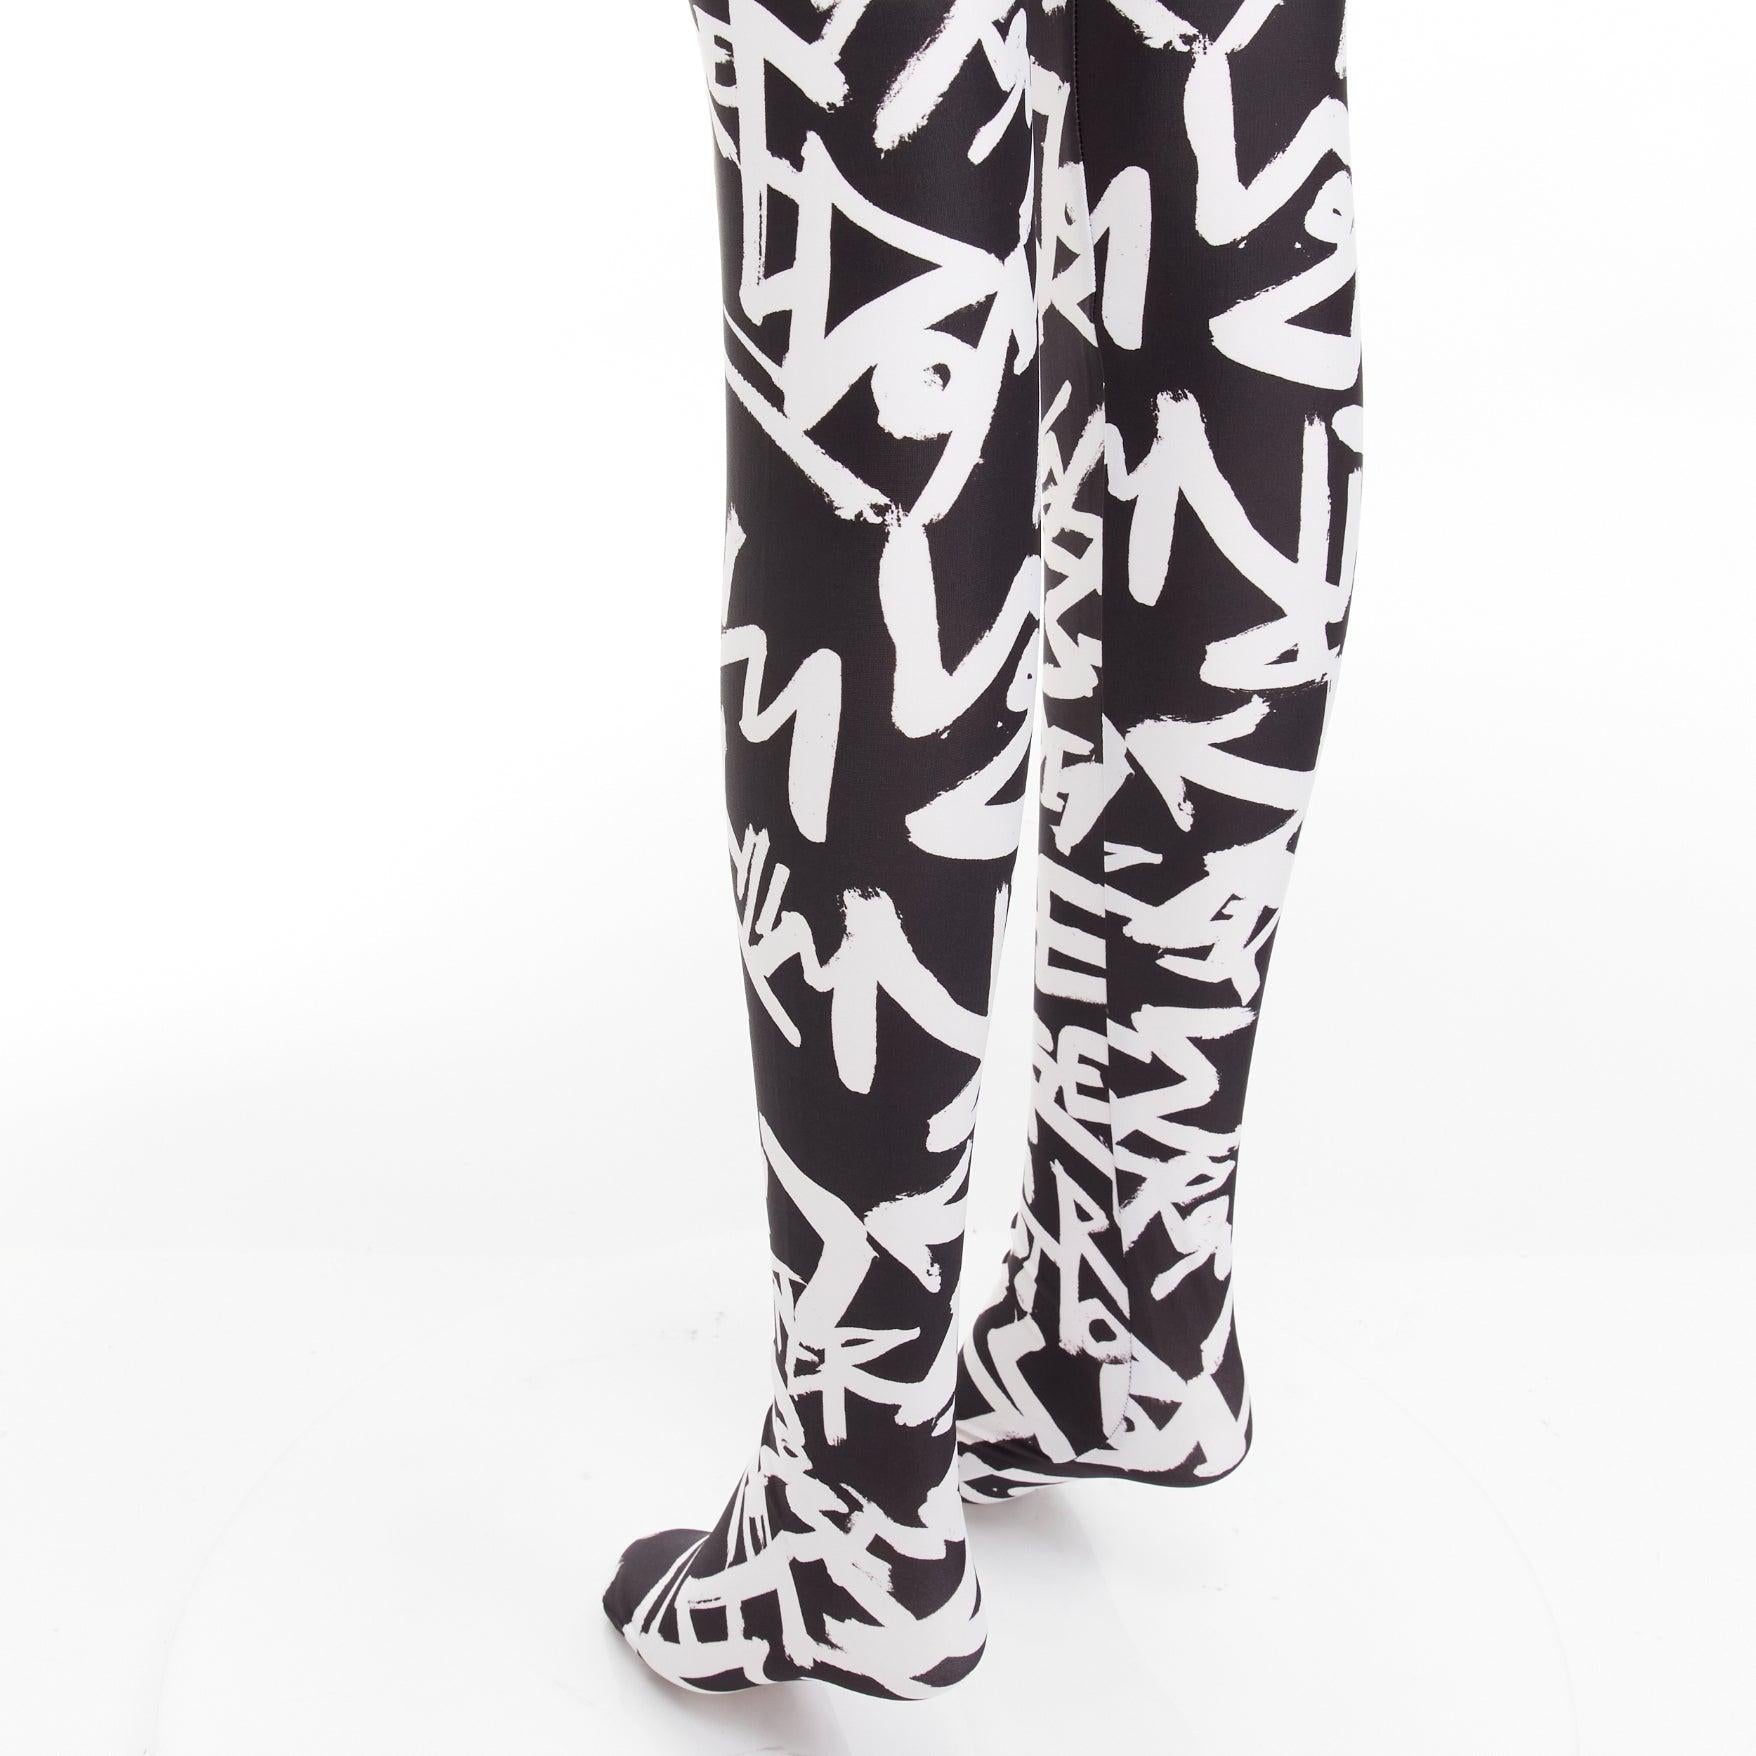 COMME DES GARCONS 2021 black white free graffiti skinny leggings XS
Reference: AAWC/A00888
Brand: Comme Des Garcons
Collection: 2021
Material: Polyester, Blend
Color: Black, White
Pattern: Graffiti
Closure: Slip On
Made in: